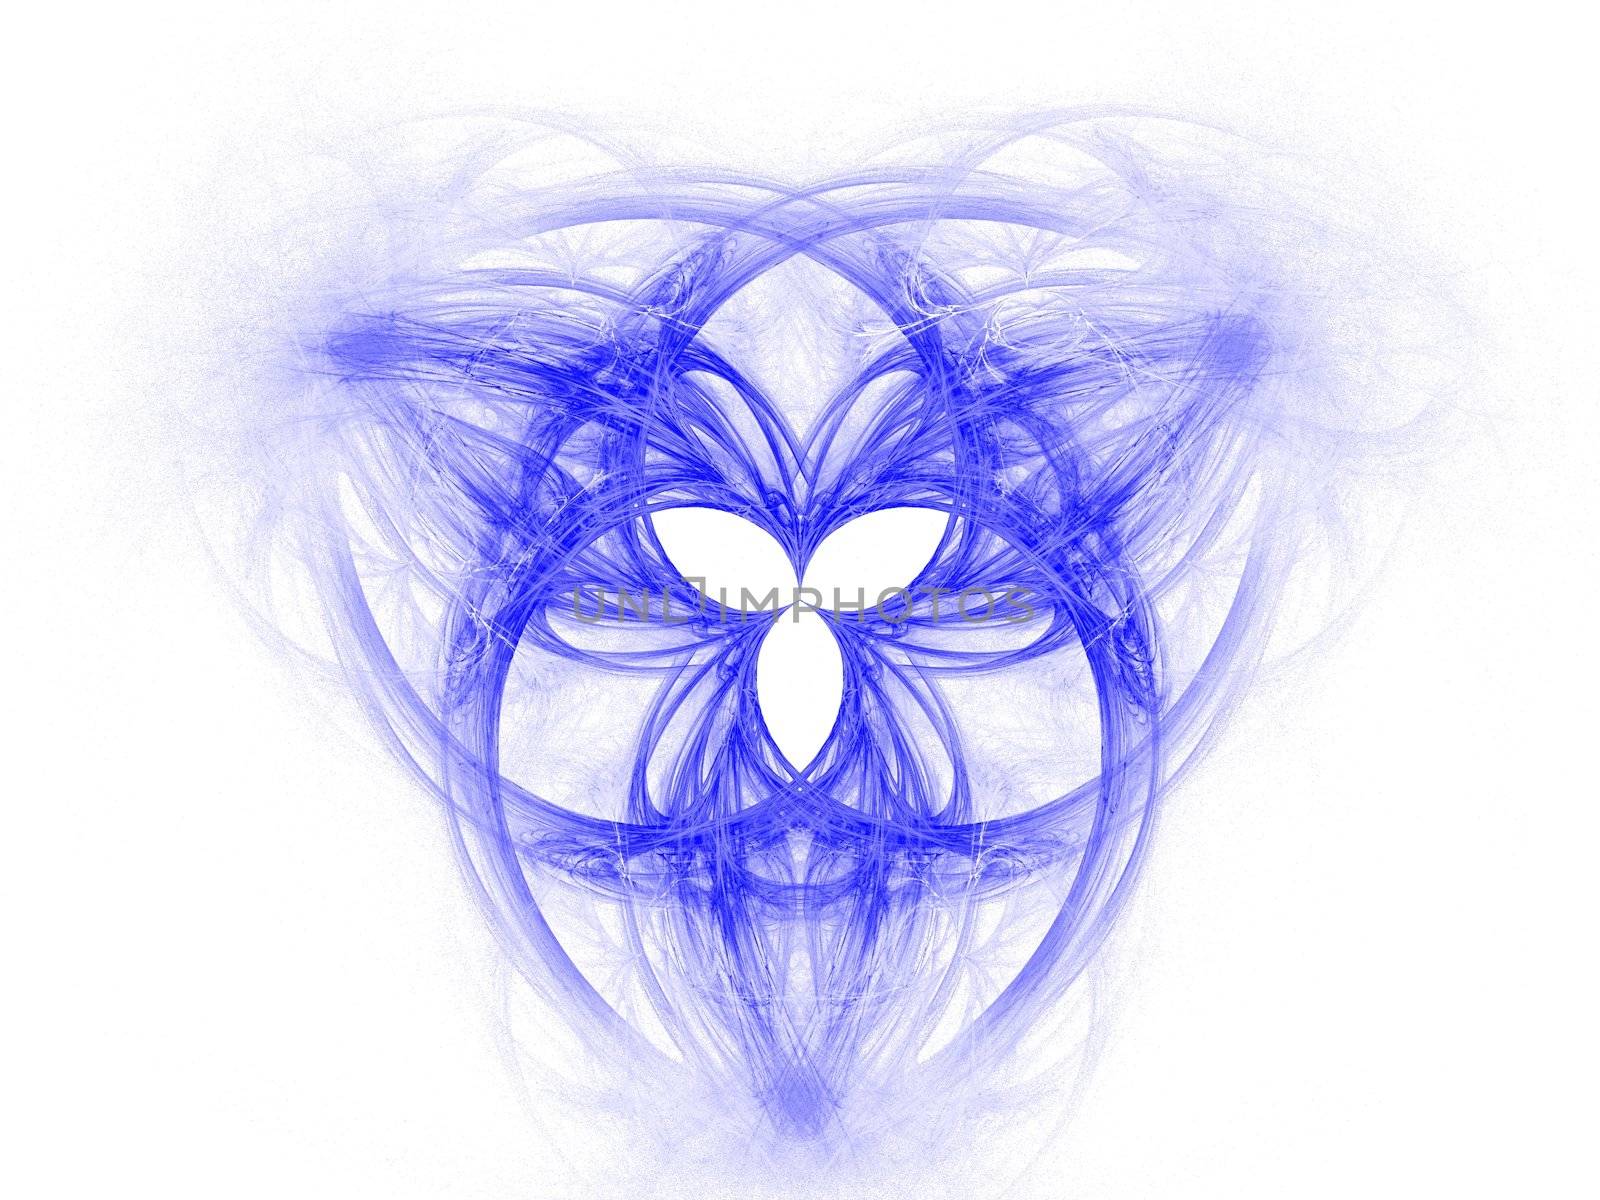 High res flame fractal forming the celtic symbol of the Holy Trinity